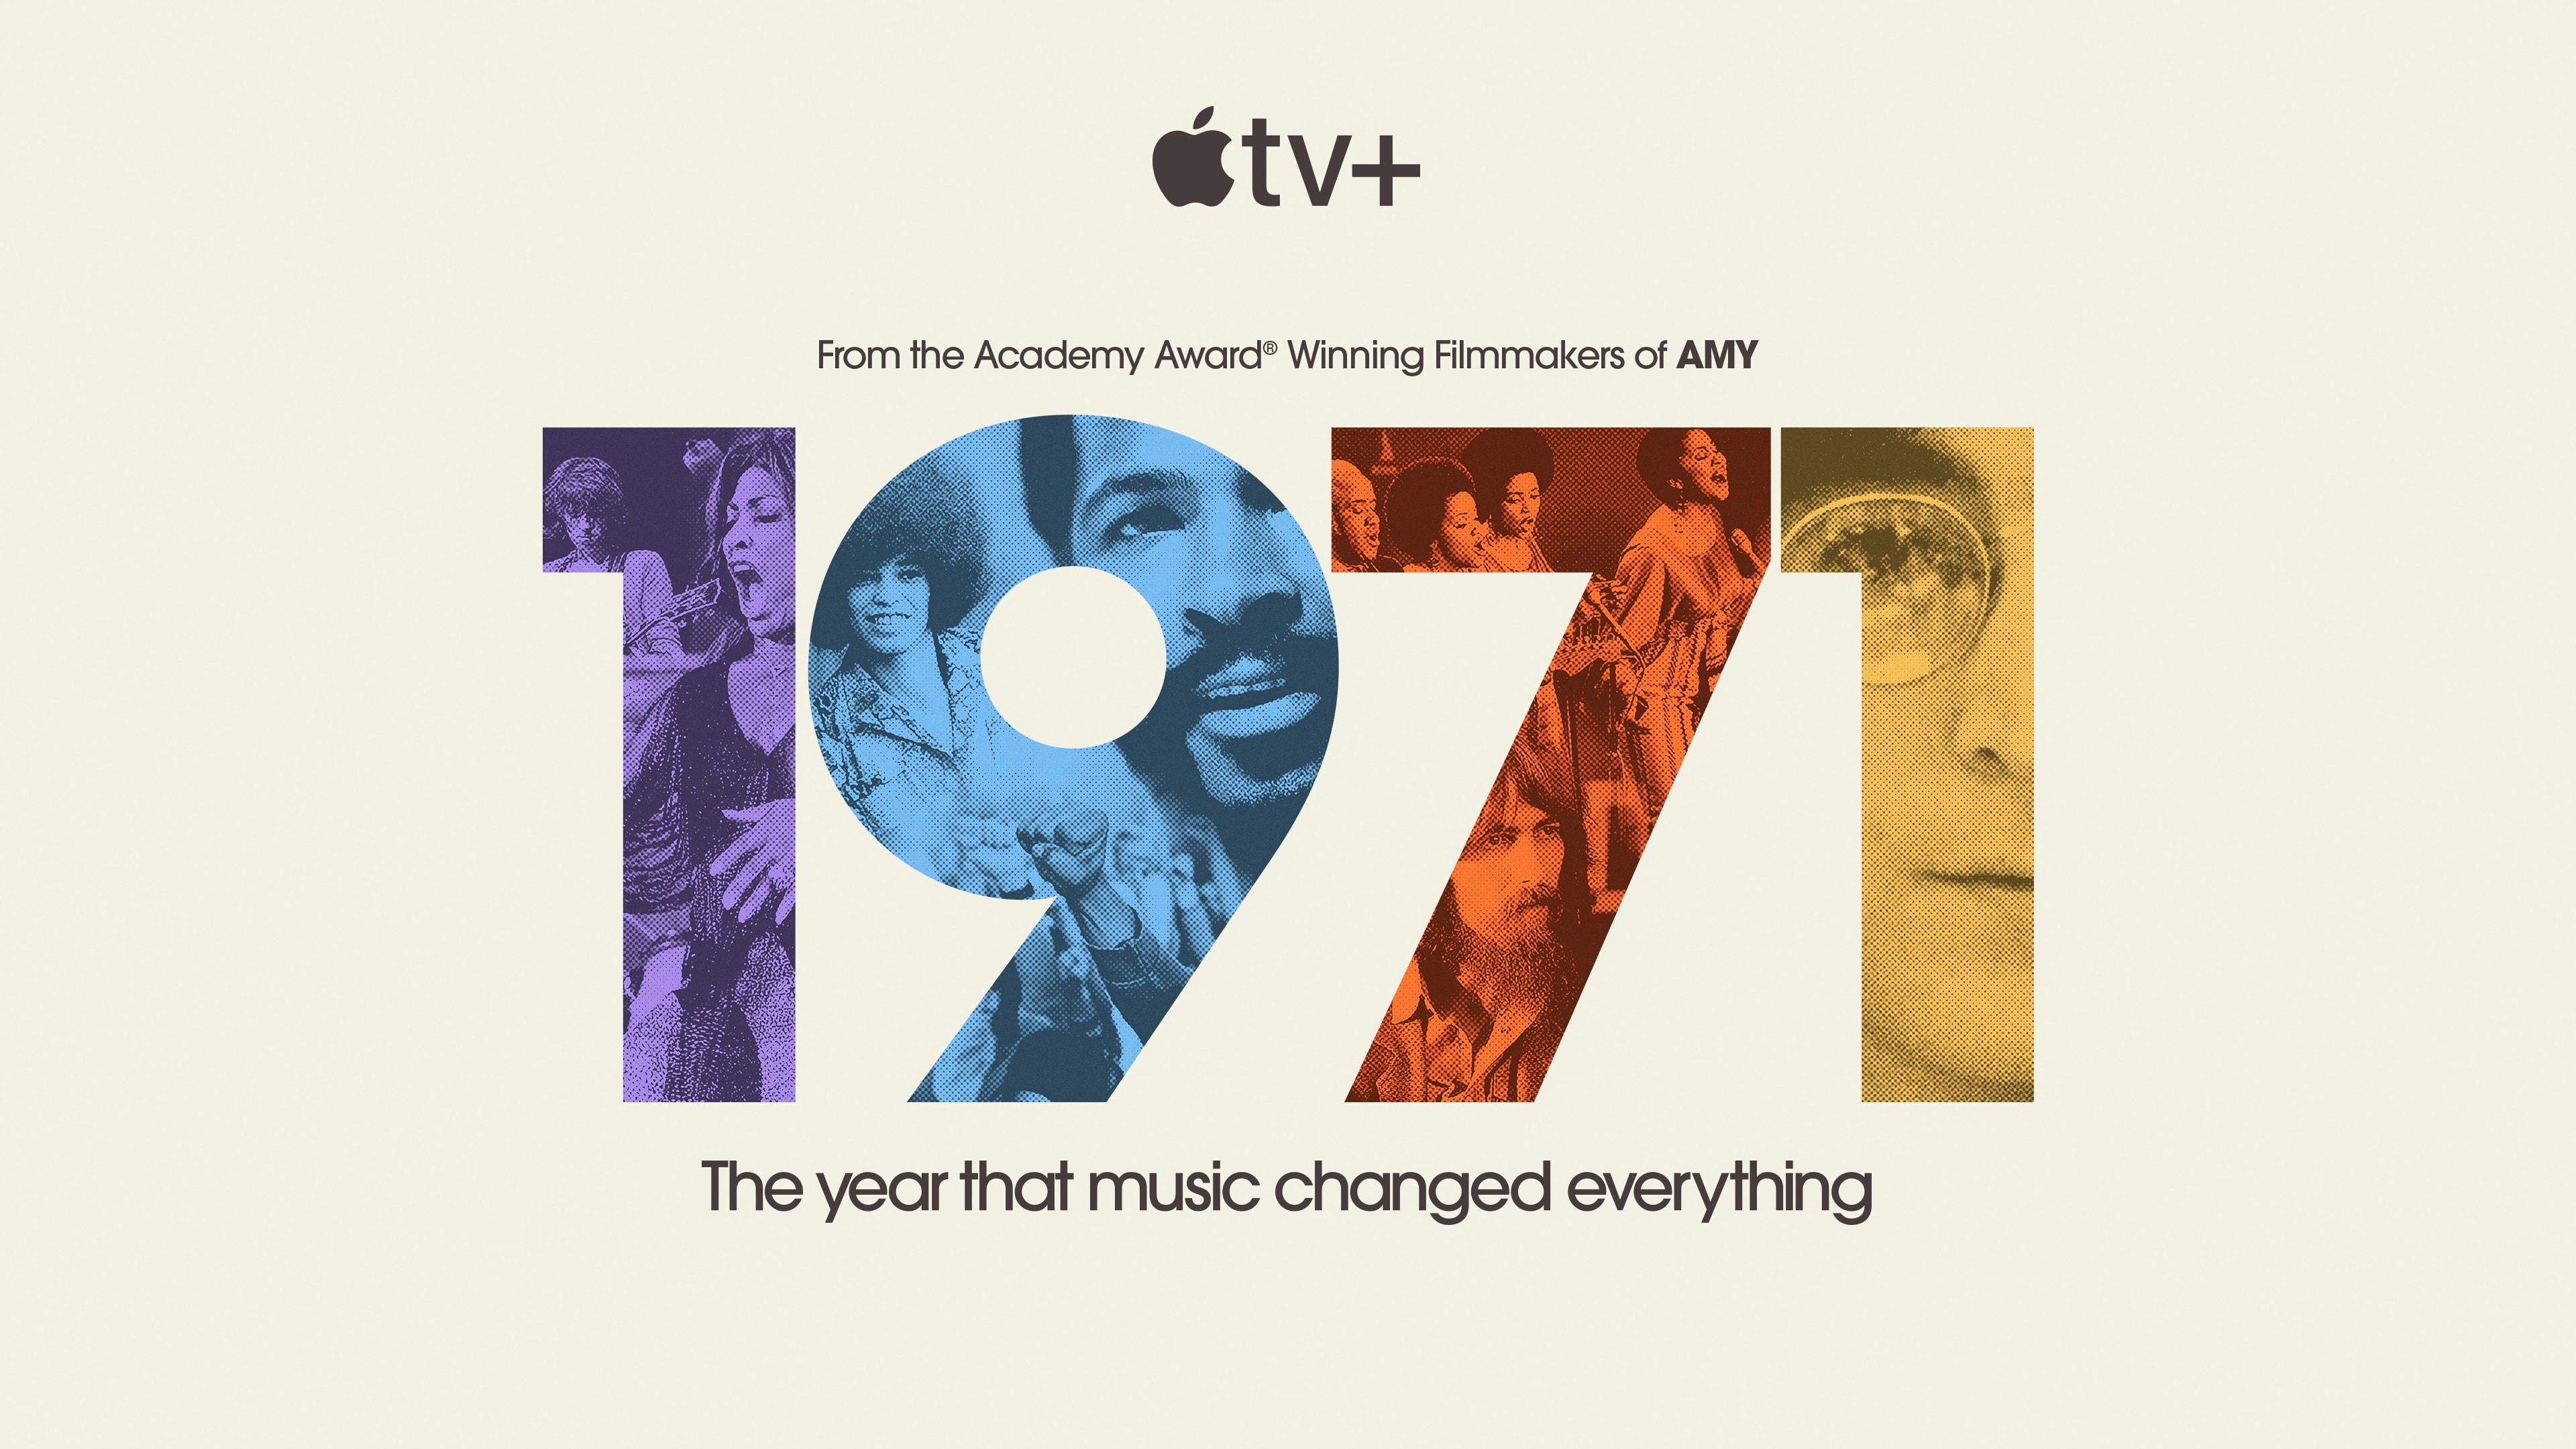 1971: The Year That Music Changed Everything review: This Apple TV+ docuseries is perversely comprehensive, arbitrary and weightless.